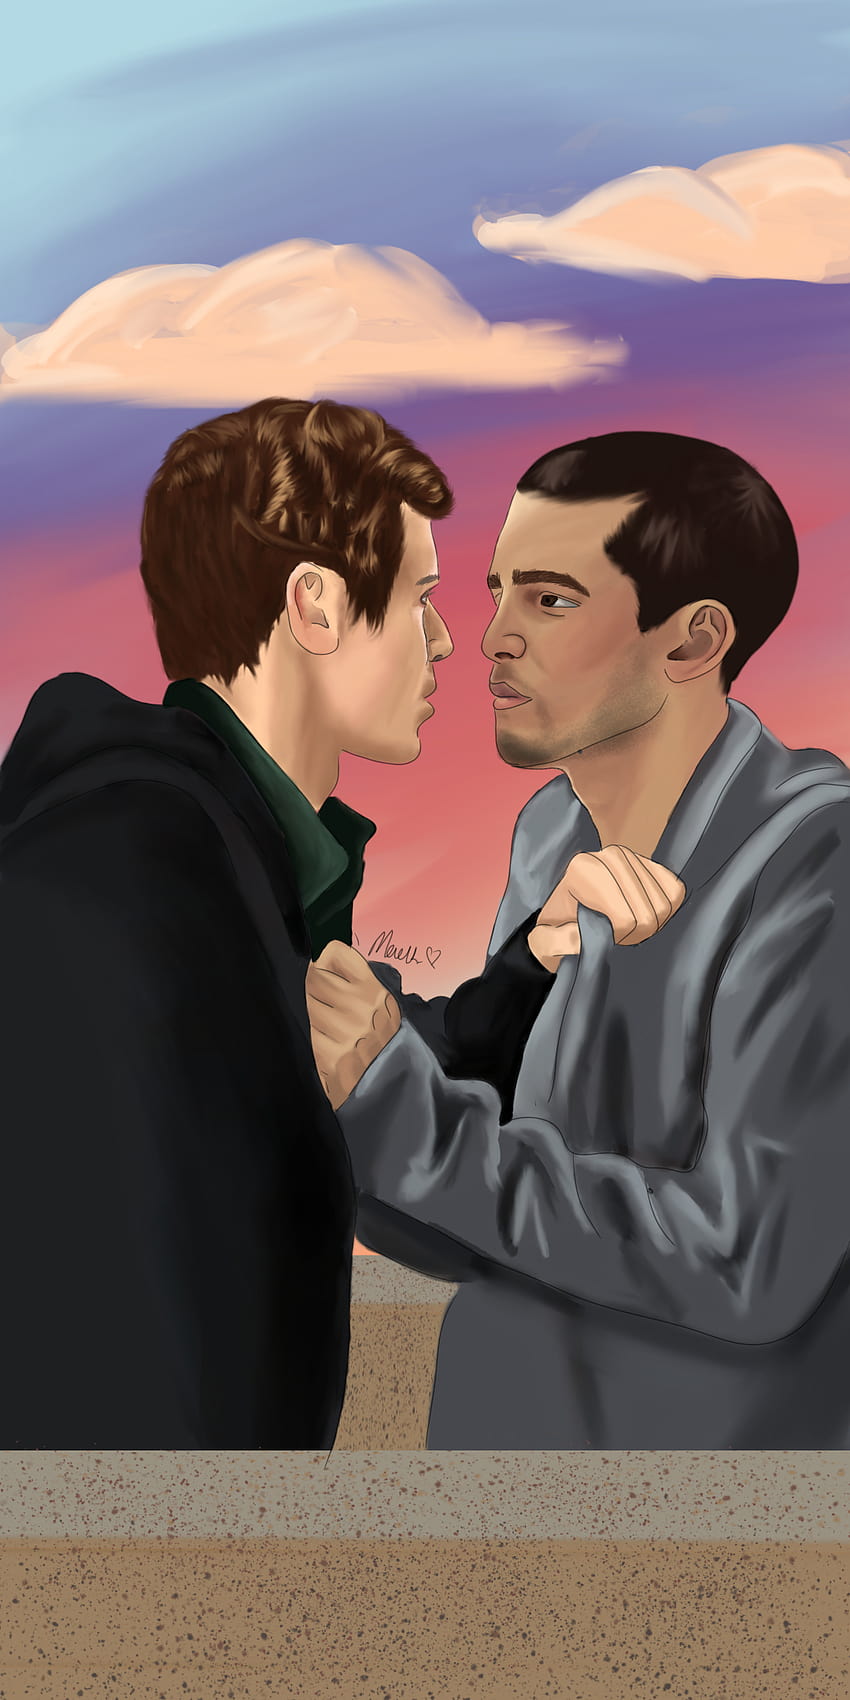 A I drew of Omar and Ander from Elite. Pretty gay. Feel to use.: lgbt, ander elite HD phone wallpaper